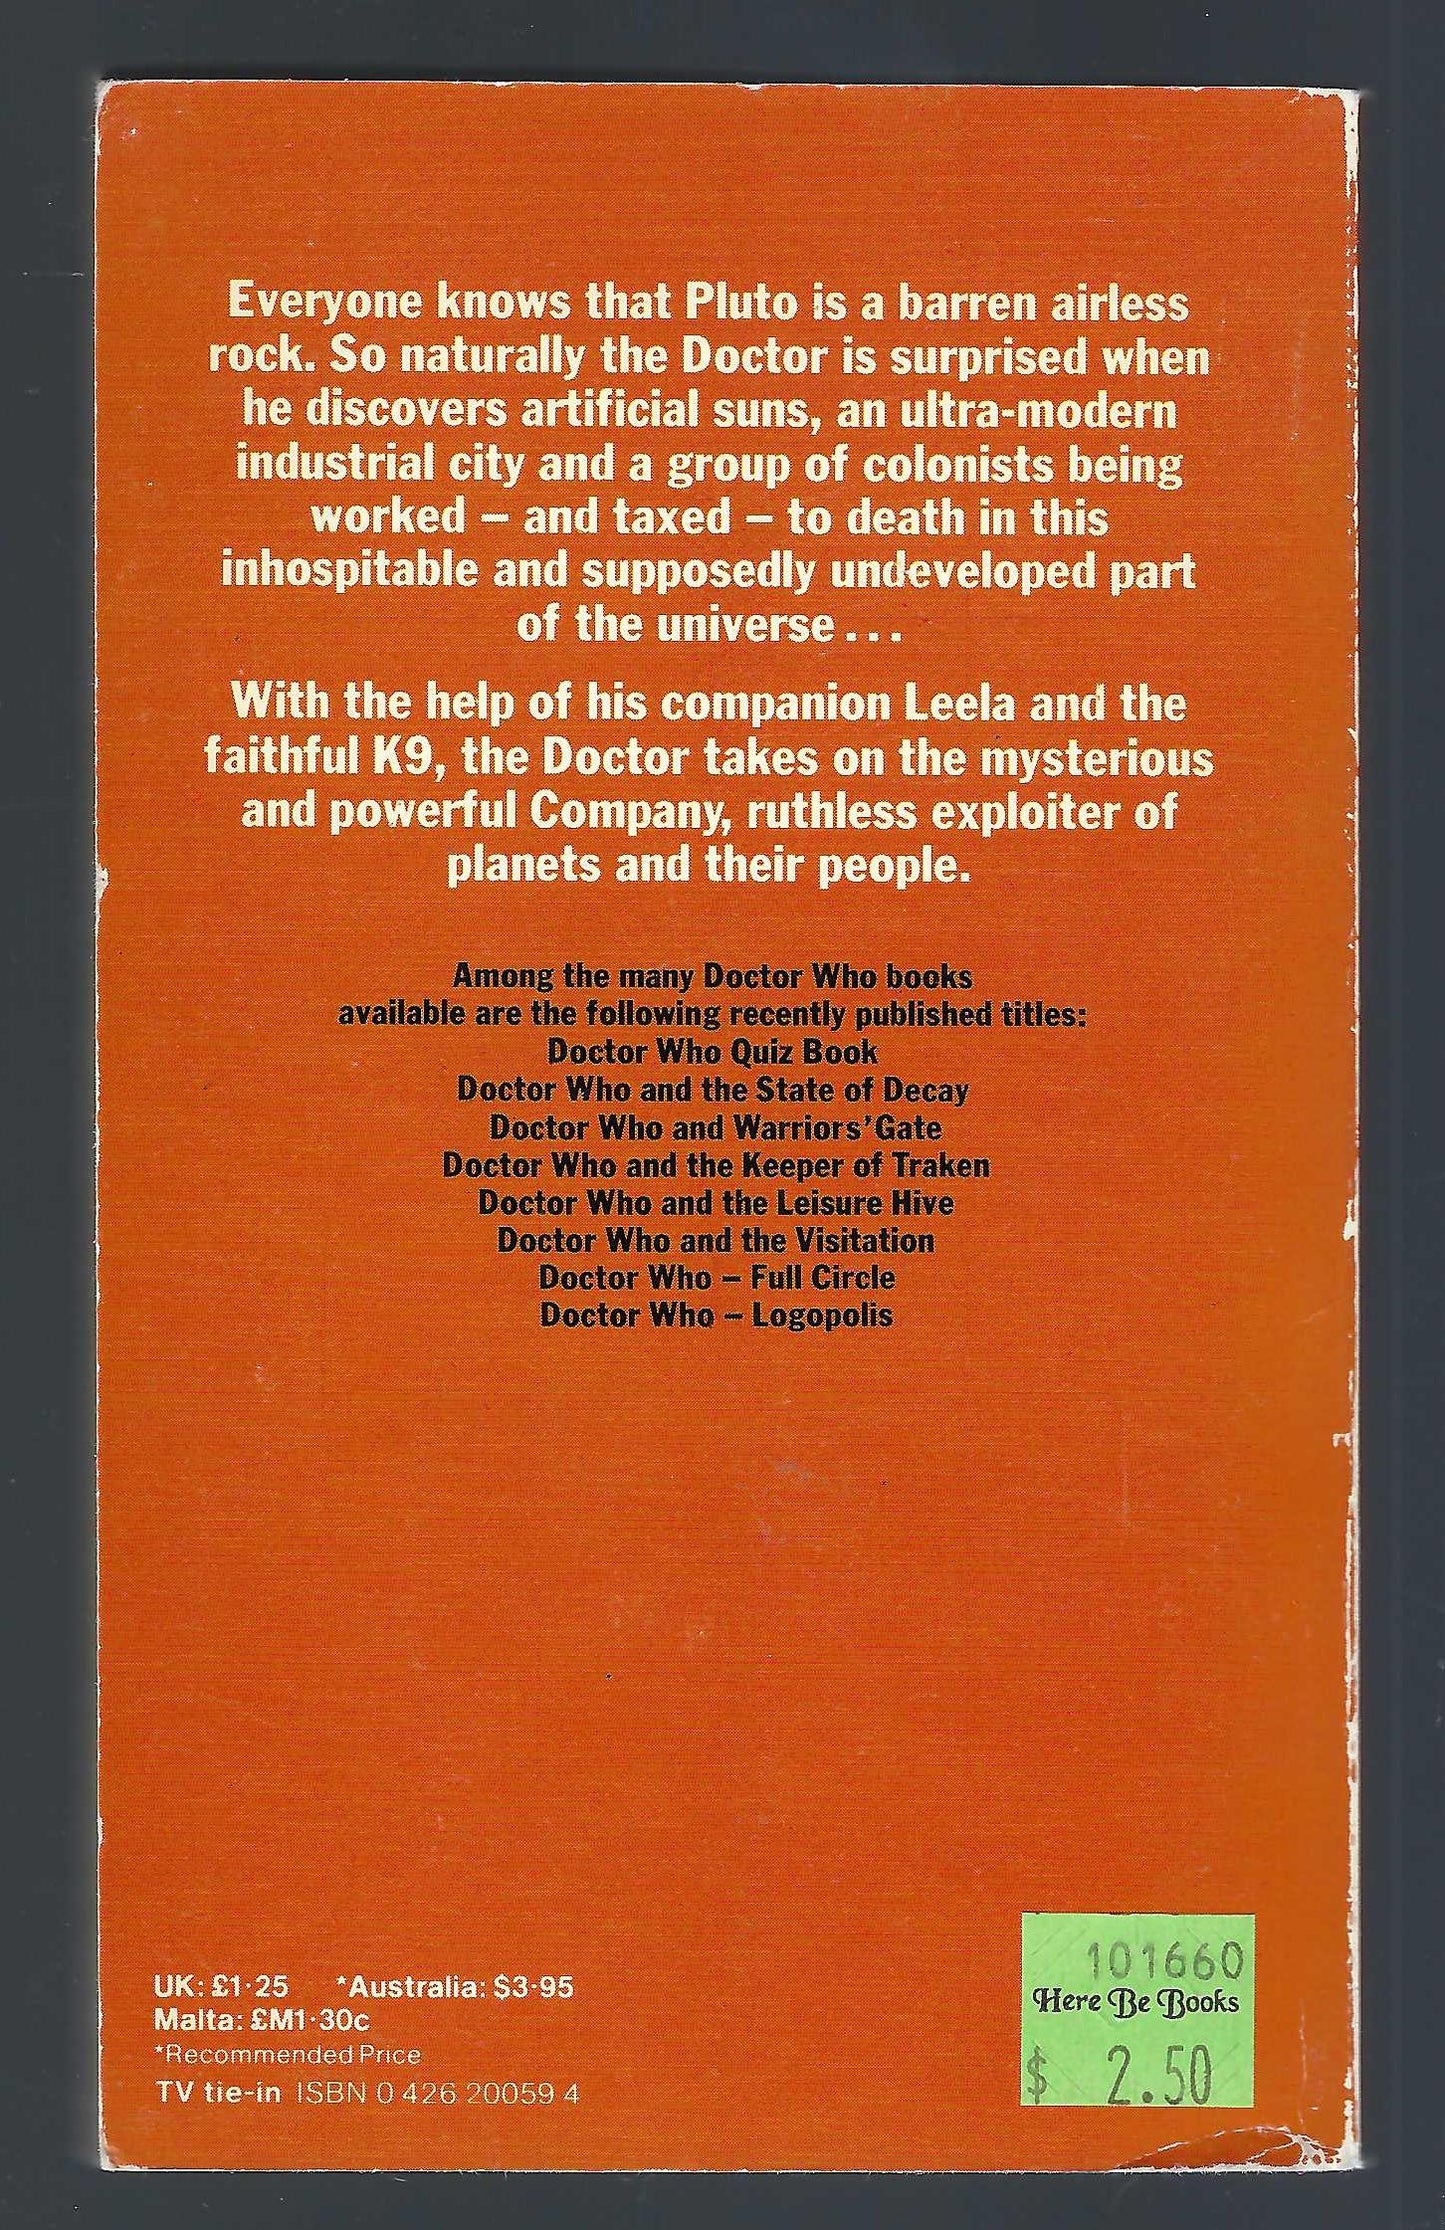 Doctor Who and the Sunmakers by Terrance Dicks back cover